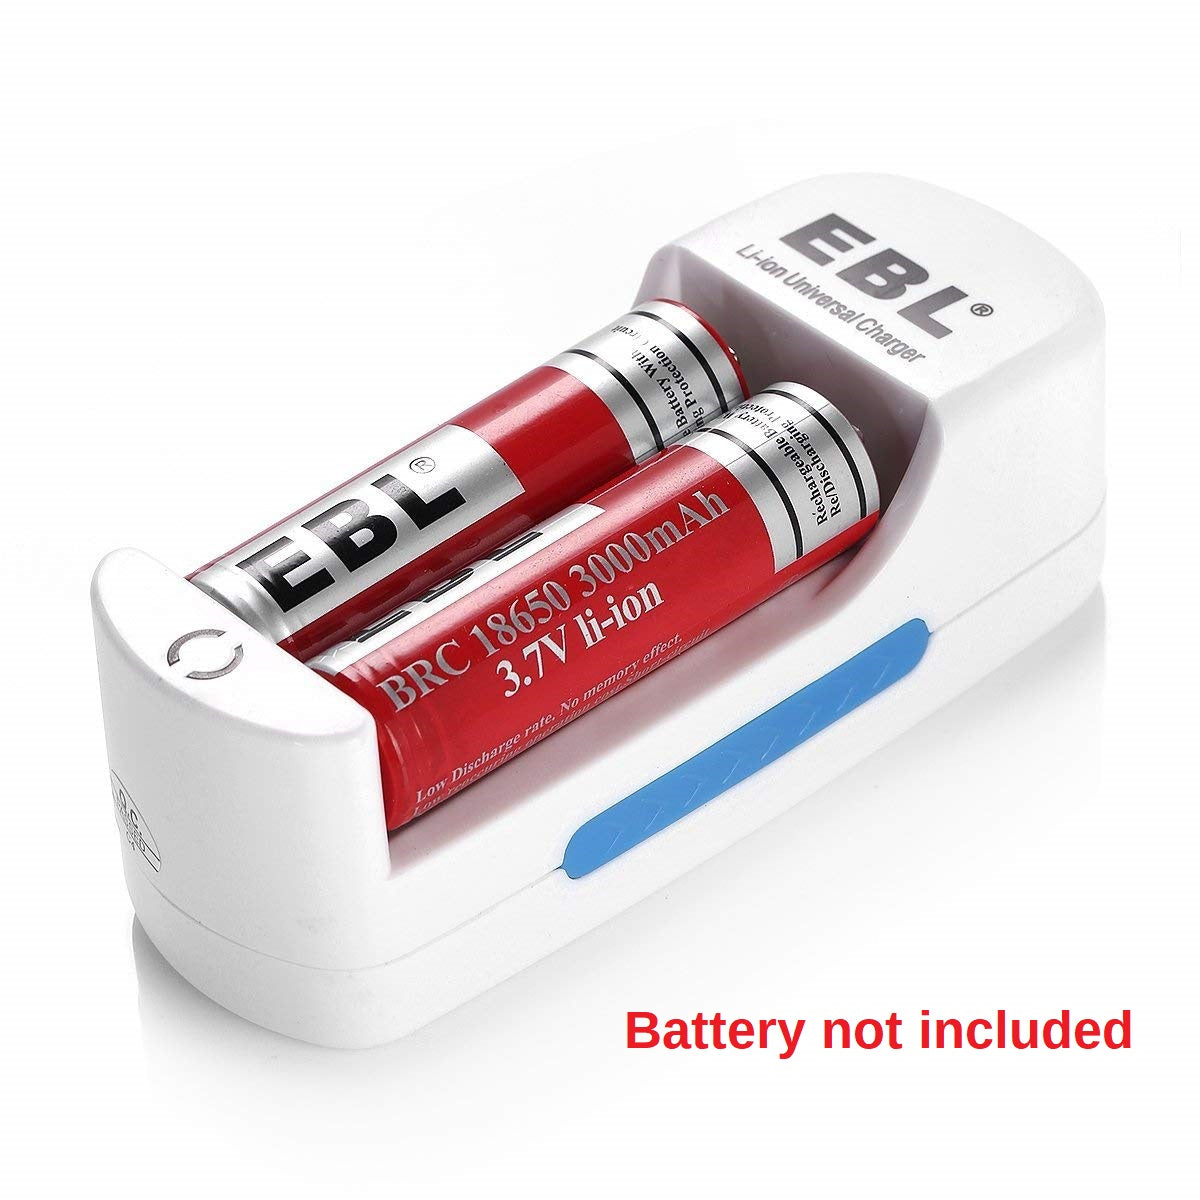 EBL Lithium Vs Ni-MH Rechargeable AA Batteries Review